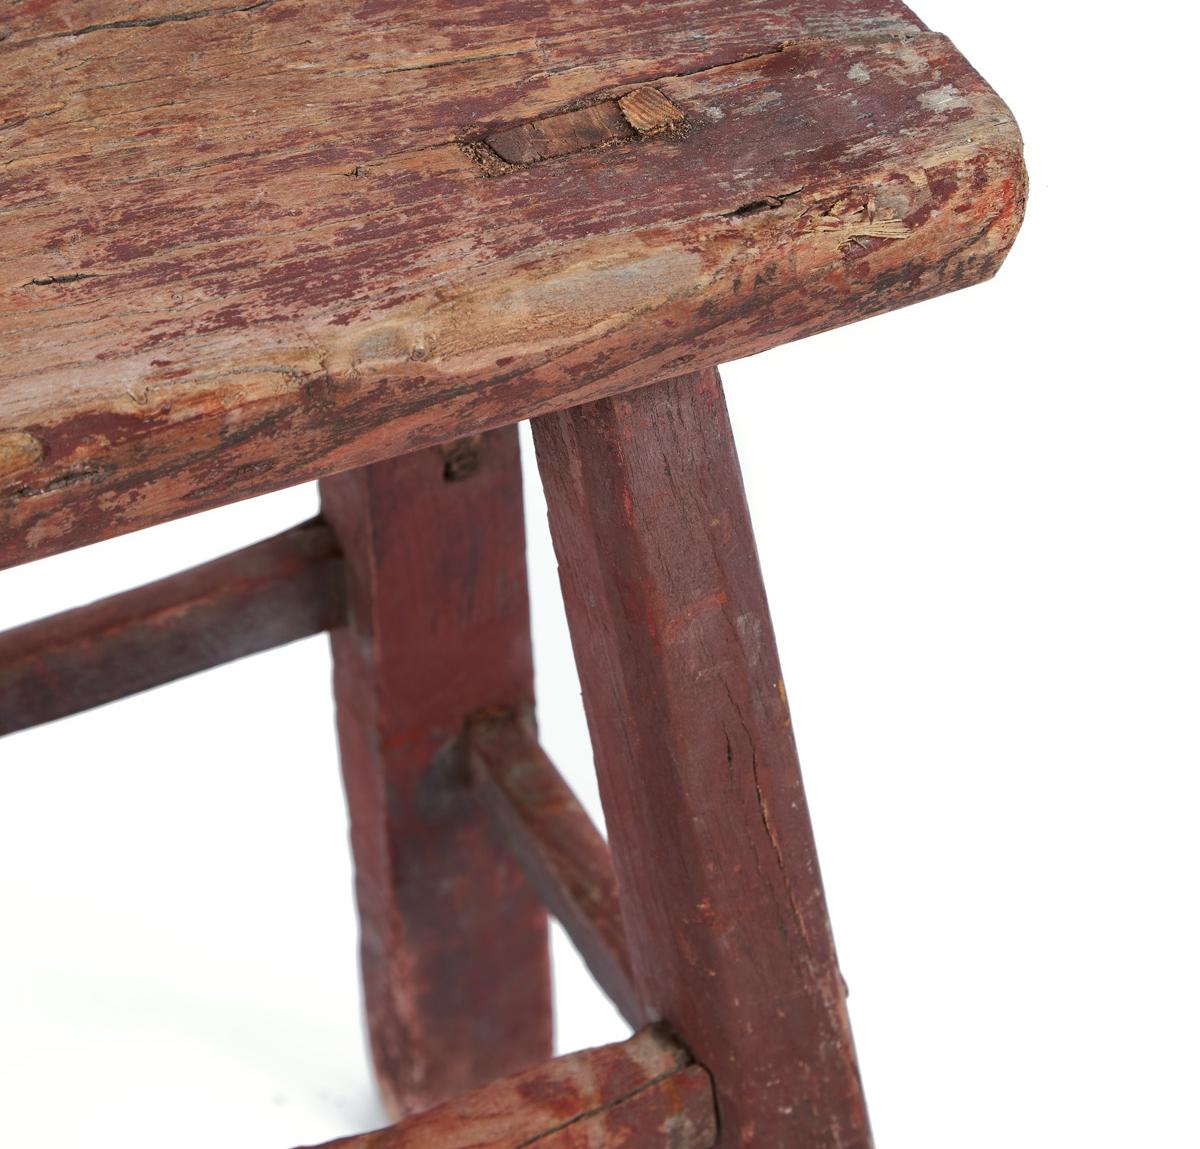 Vintage wooden stool in faded red. This piece is originally from Italy and thought to be from the late 19th century. The distressed appearance of the wood gives to this piece a very charming texture.